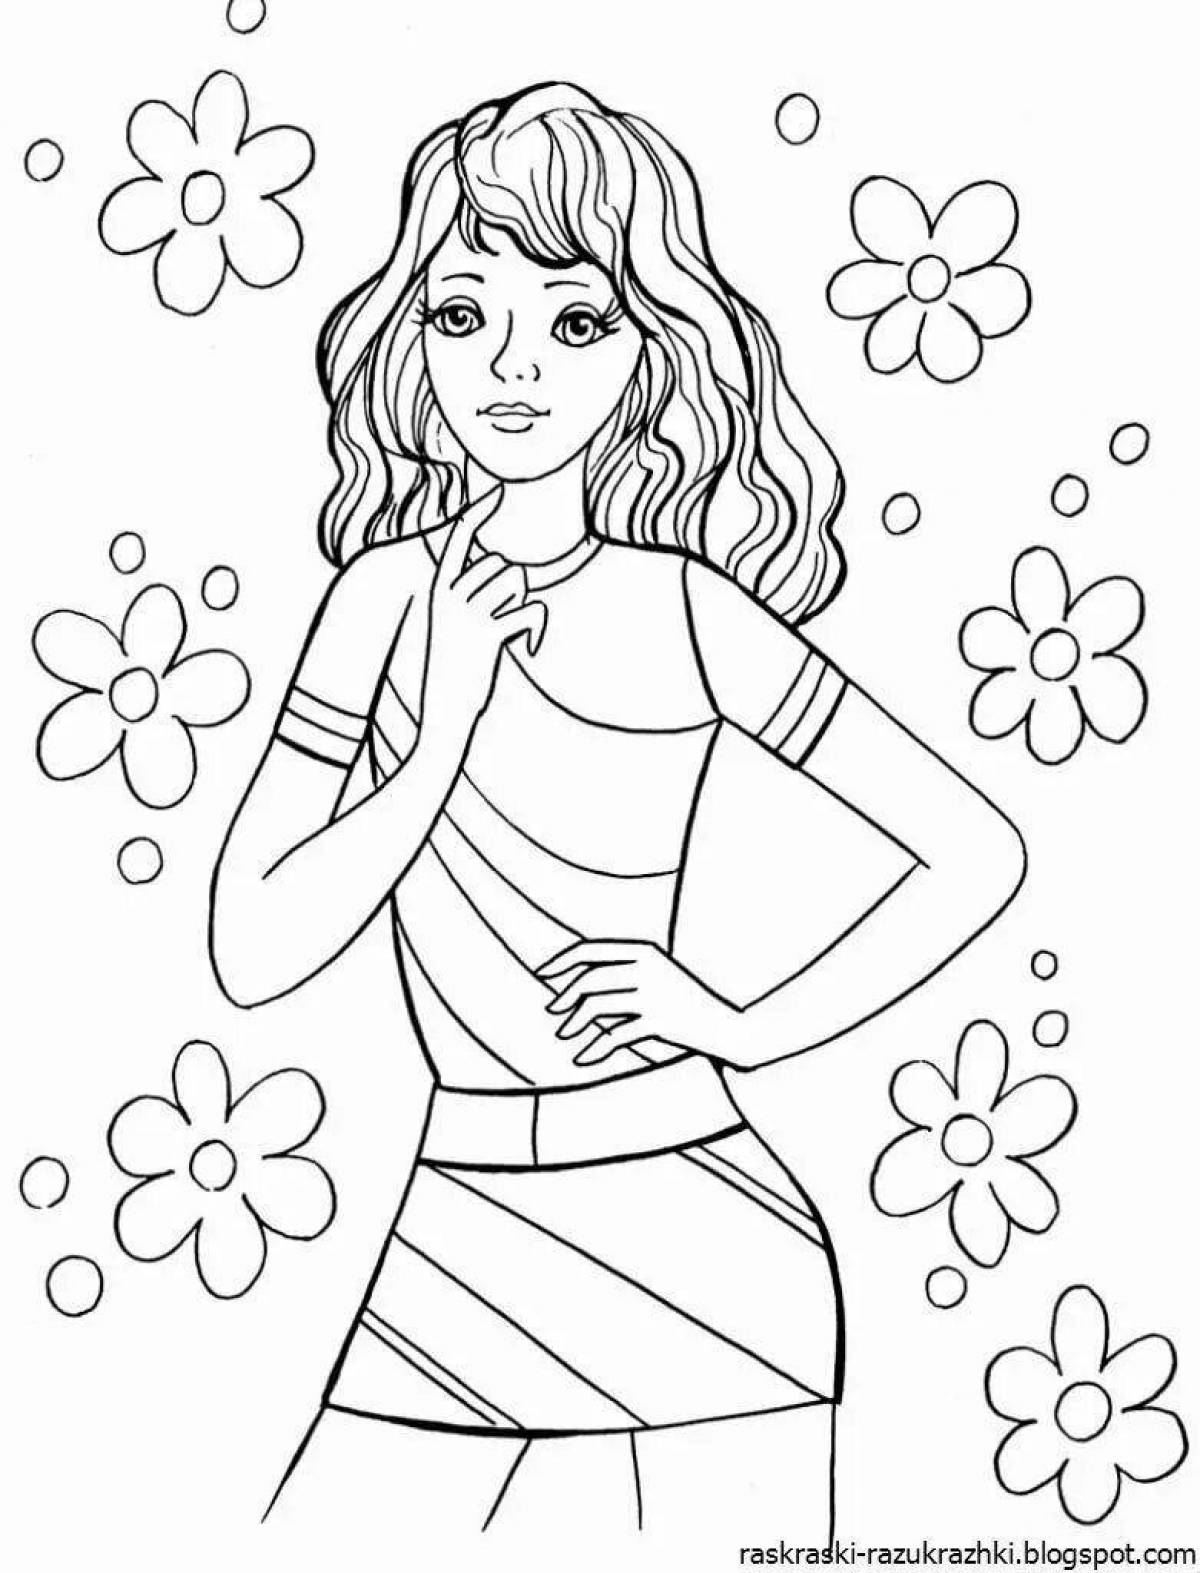 Adorable coloring book for girls 10-11 years old